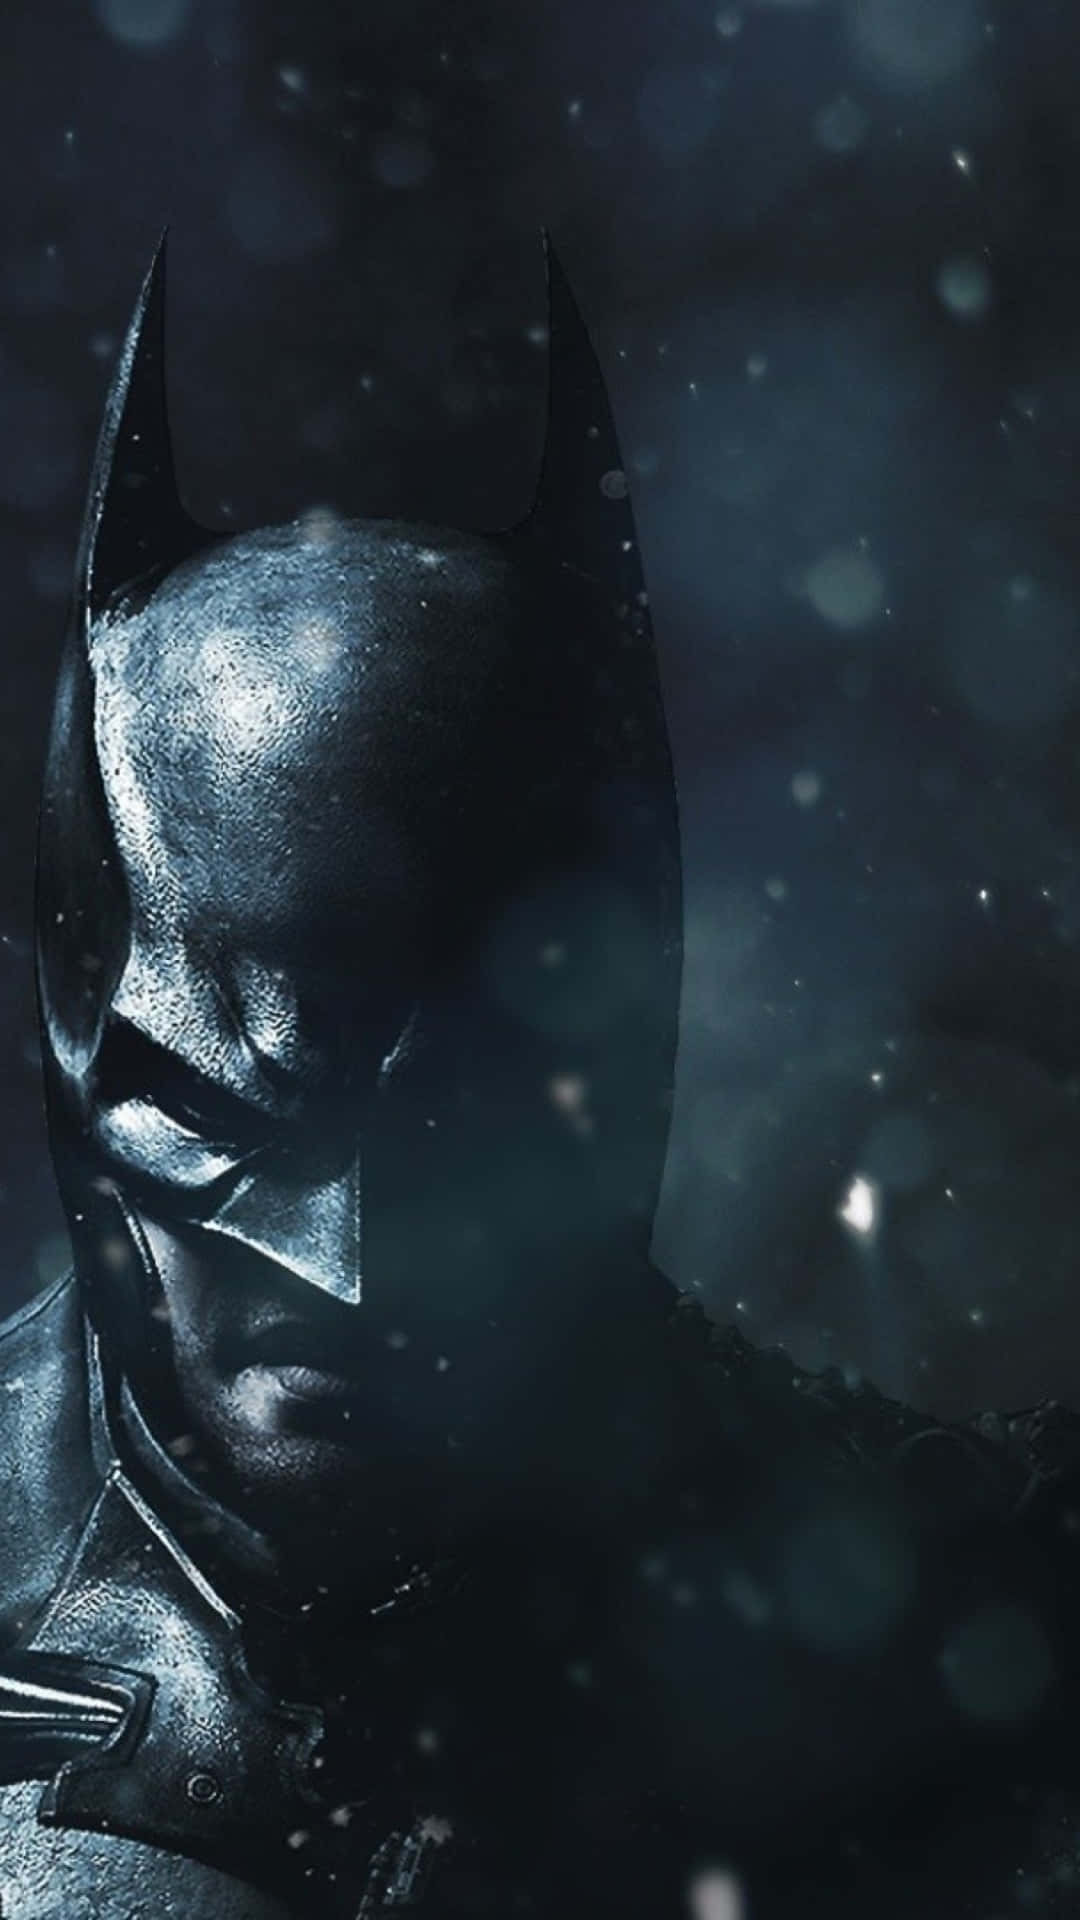 Stay Fearless with the Awesome Batman iPhone Wallpaper